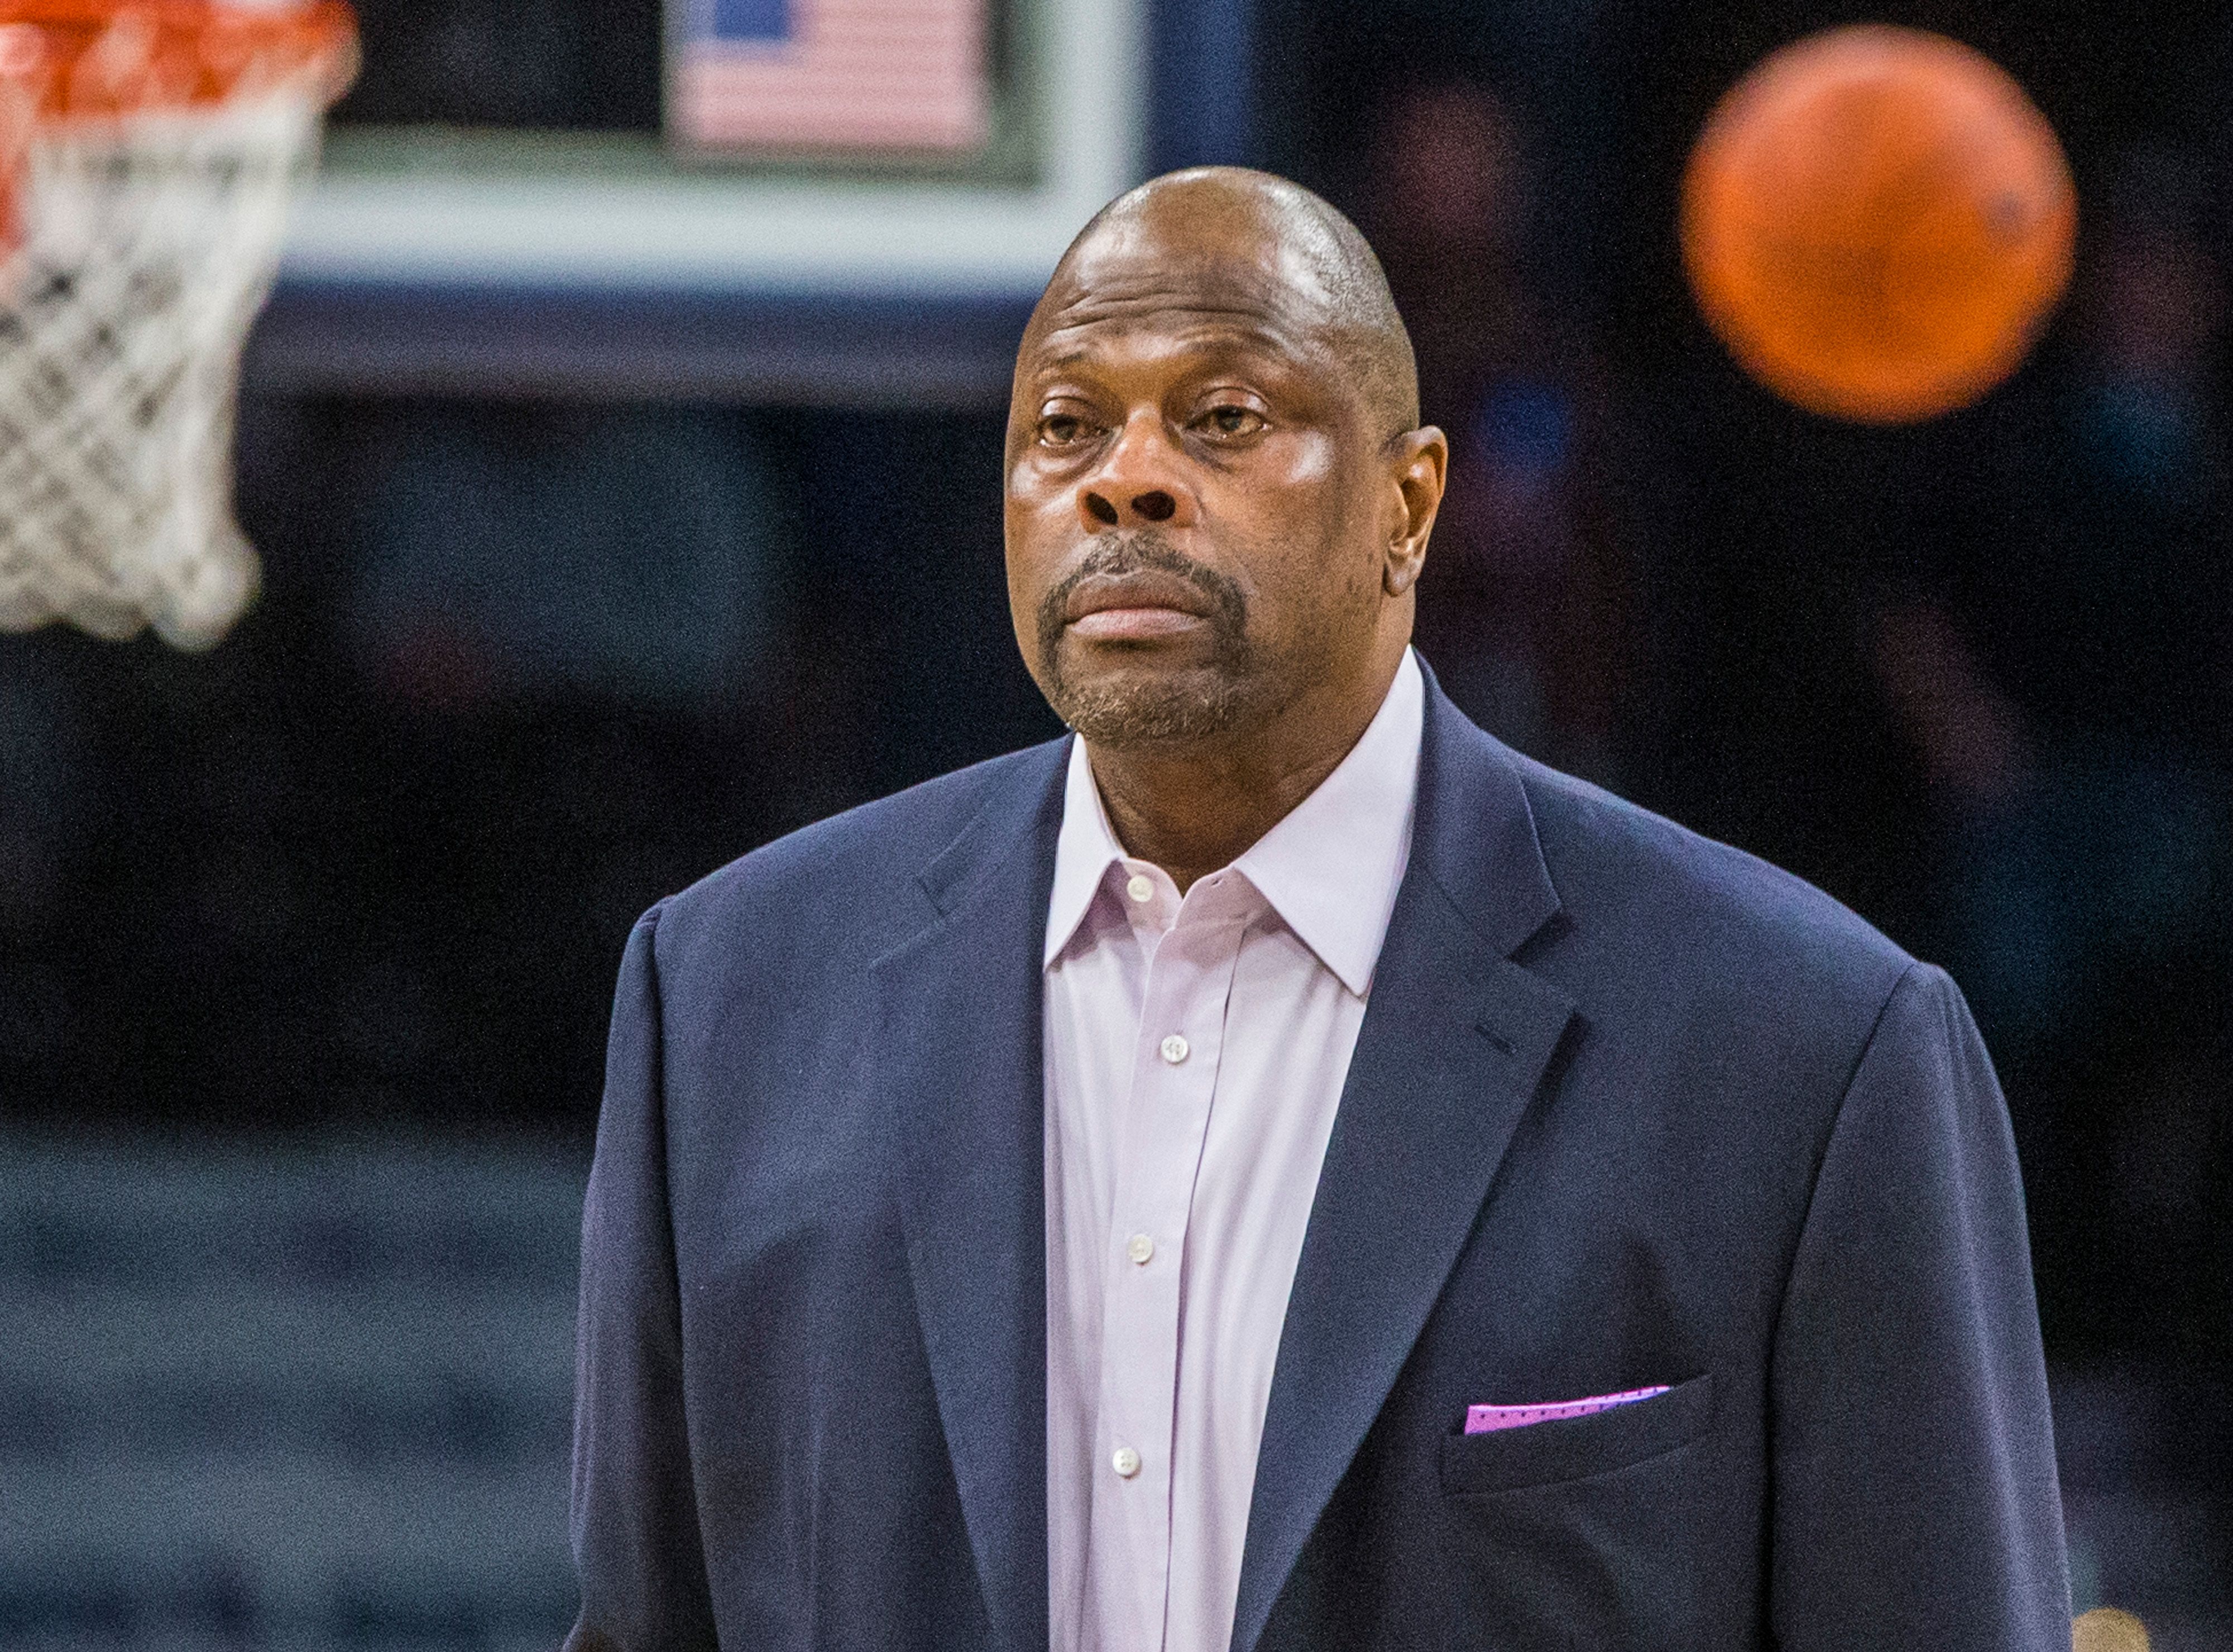 Head Coach Patrick Ewing from Georgetown University during a game between Butler and Georgetown at Capital One Arena on January 28, 2020 | Photo:Getty Images